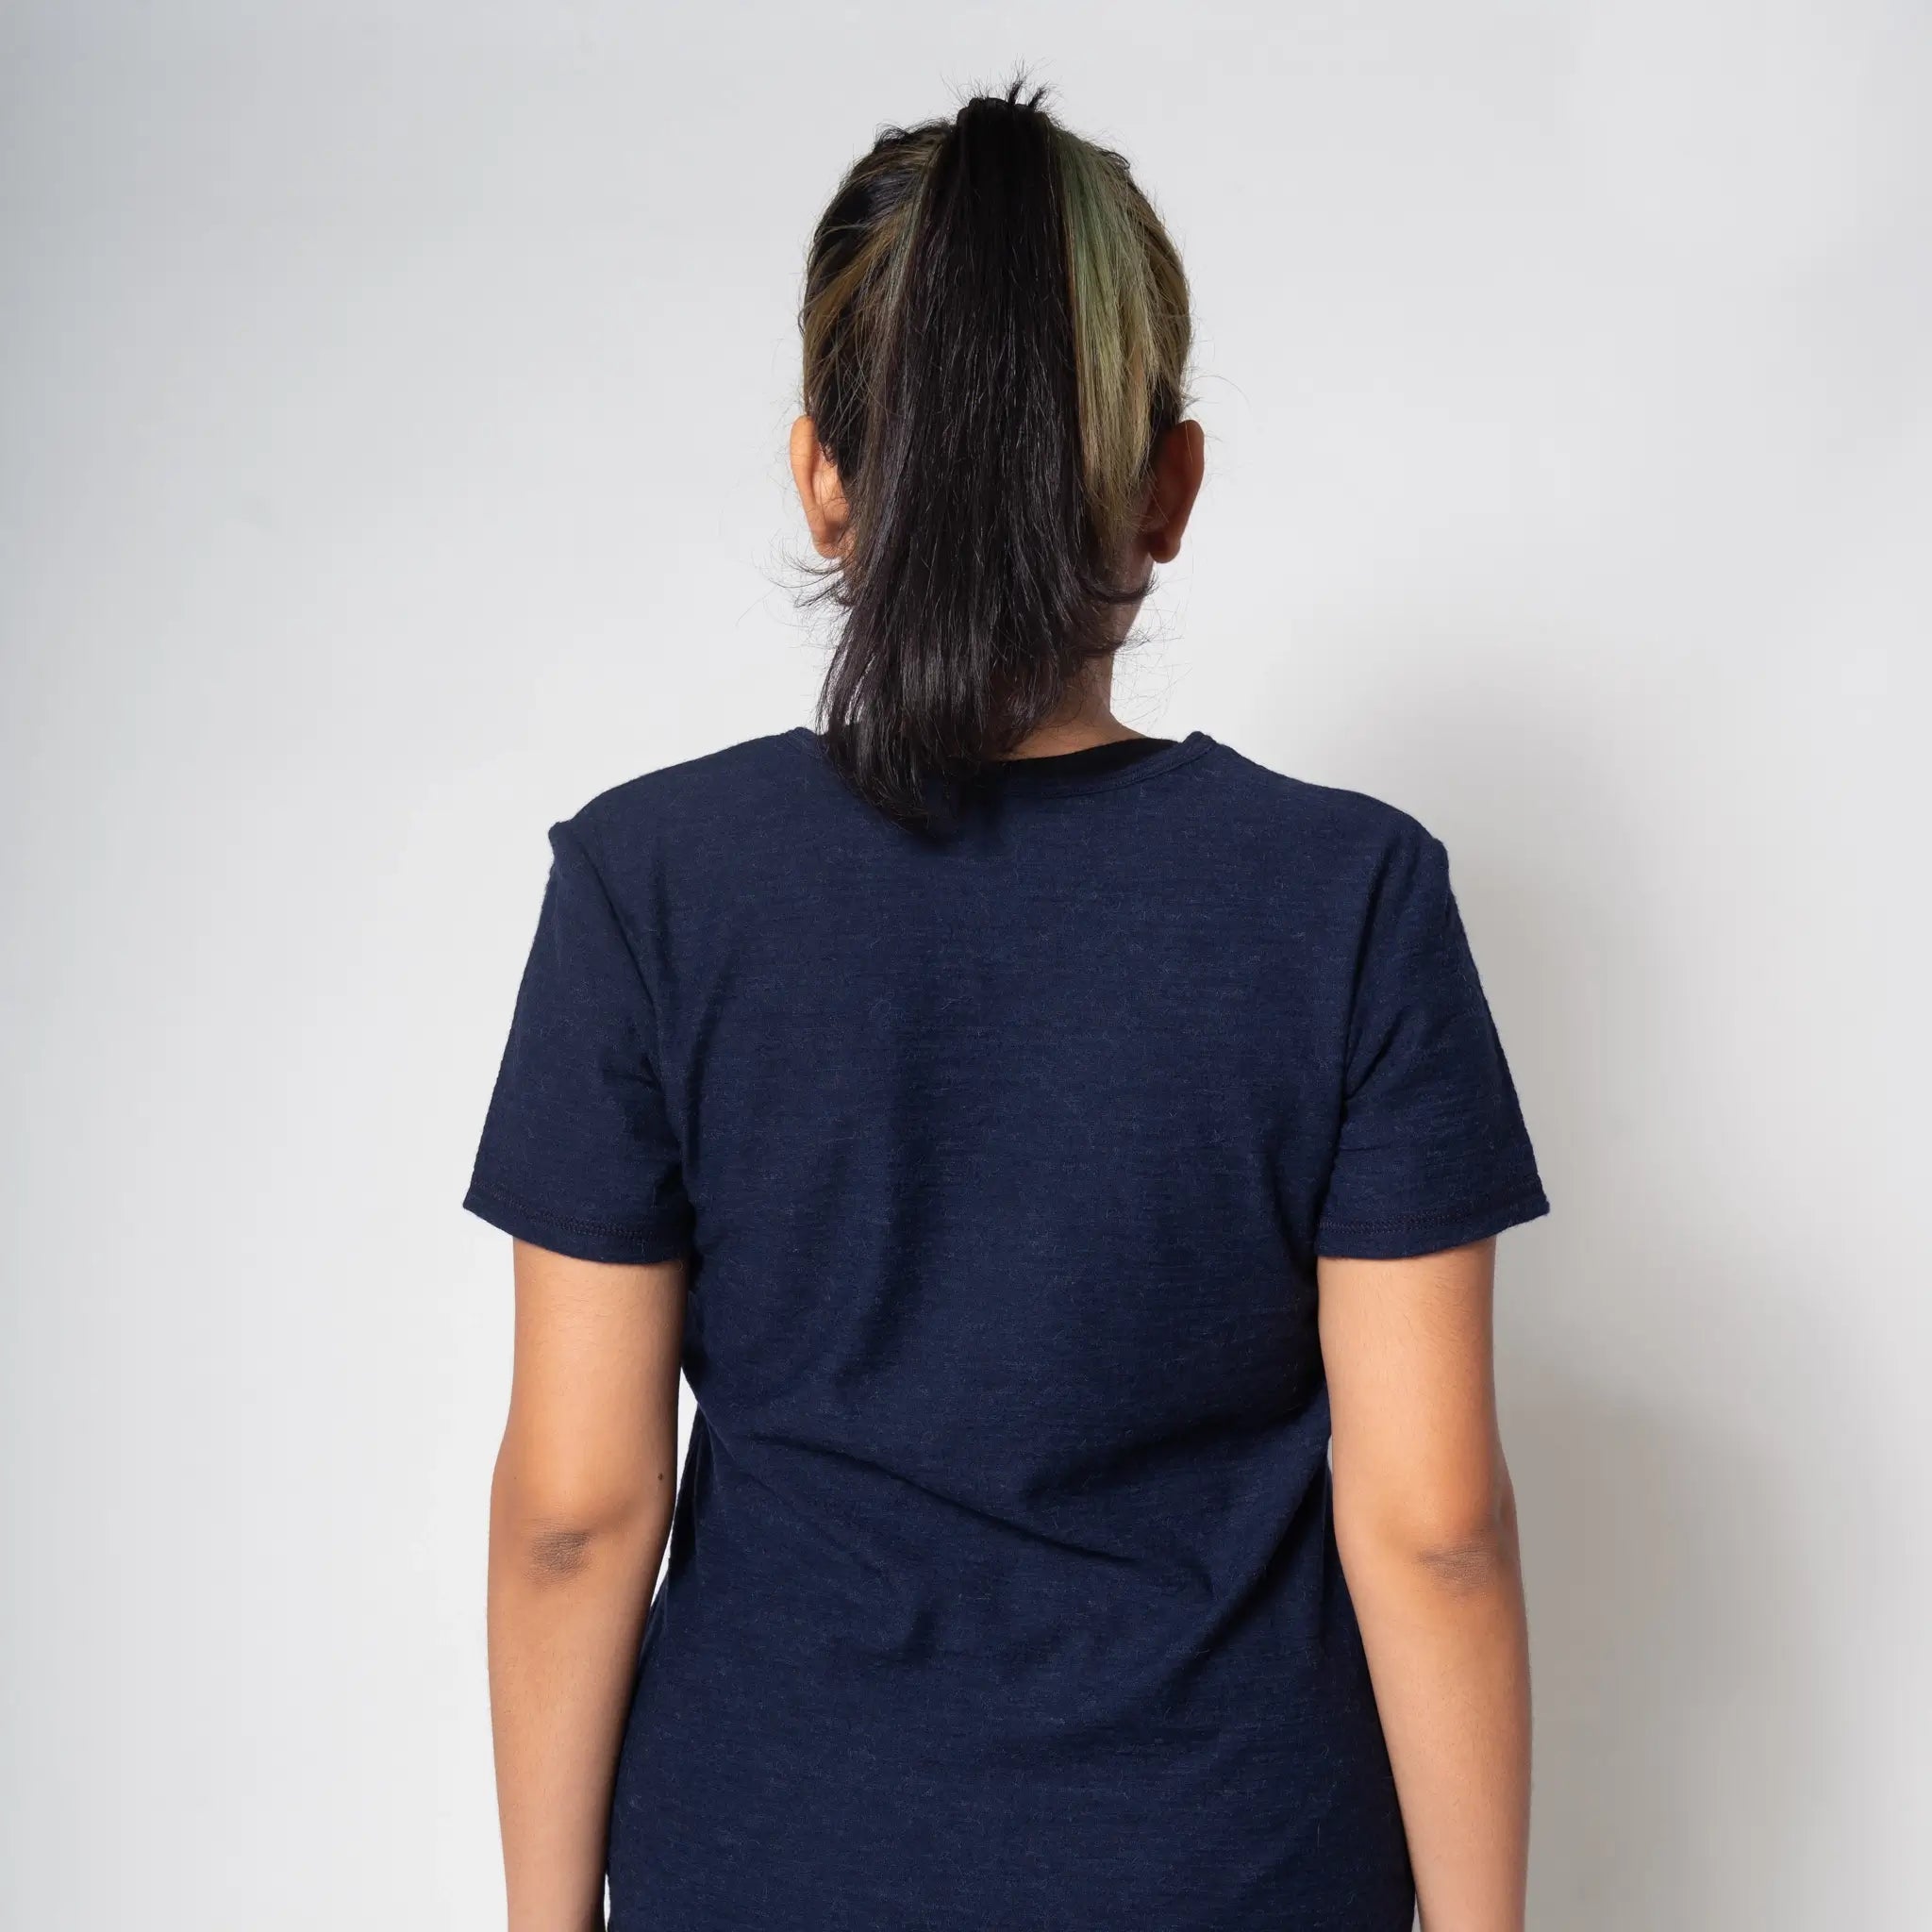 womens crew neck relaxed fit sweat wicking color navy blue